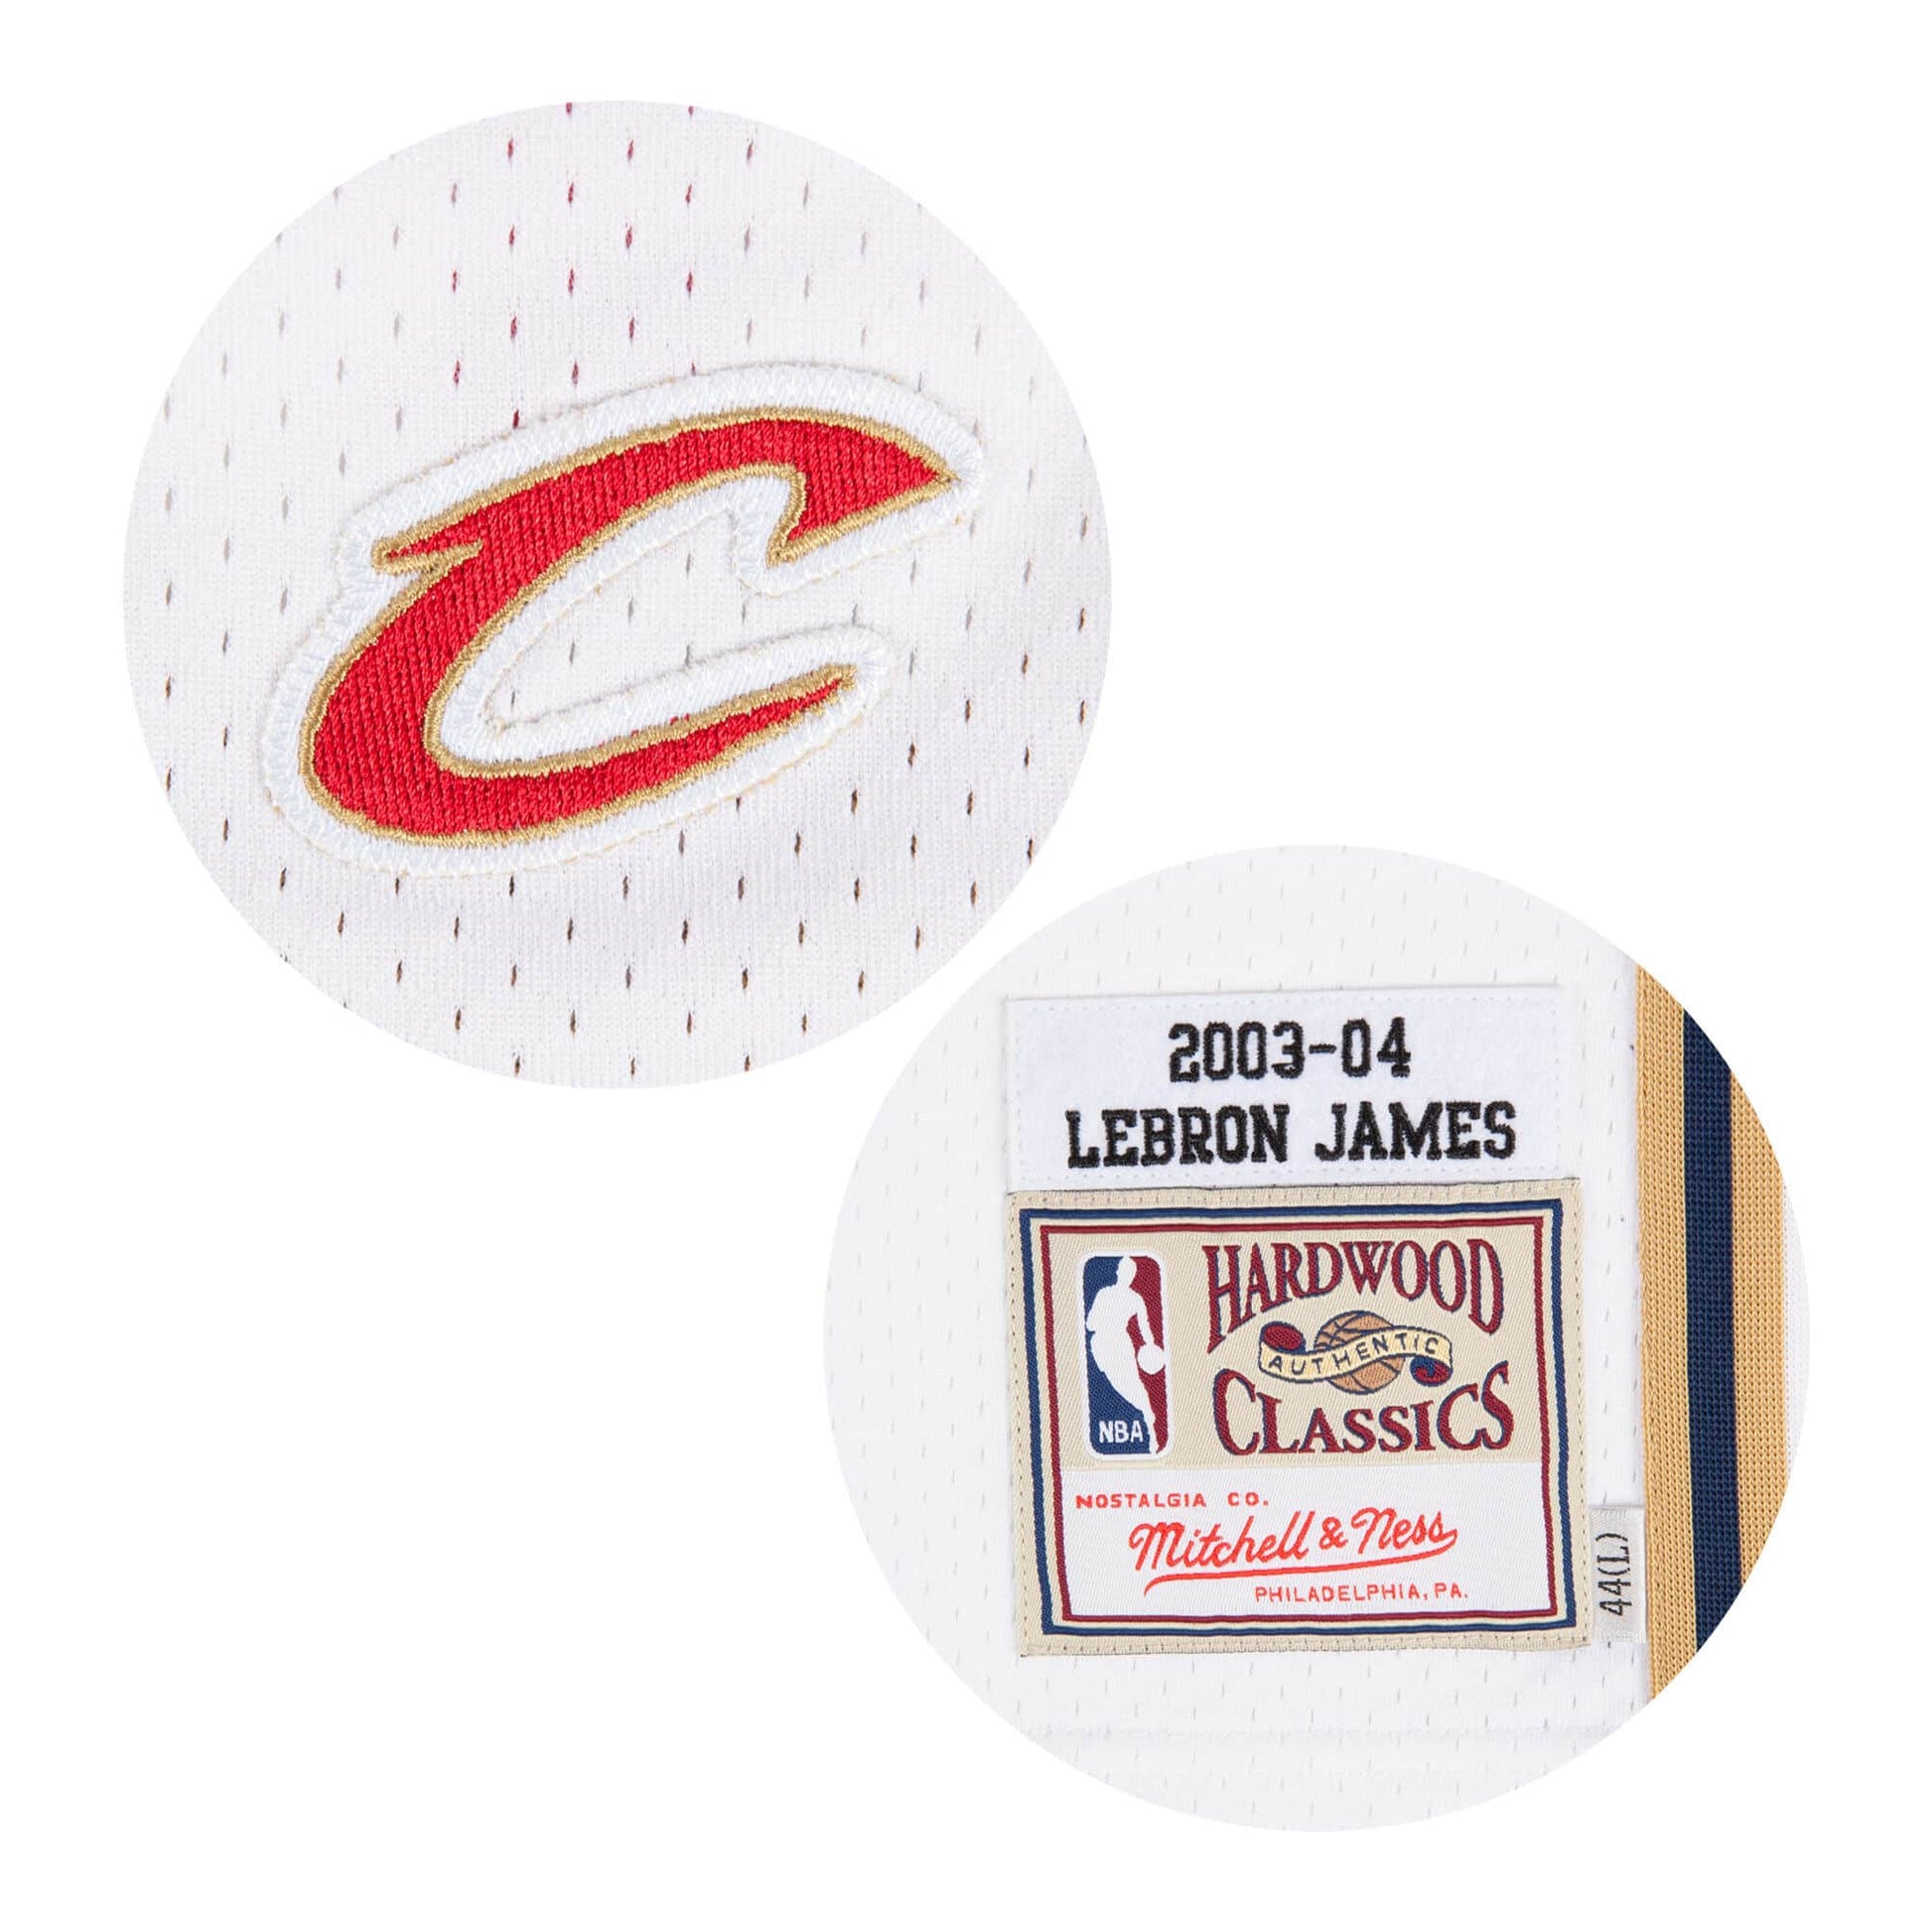 LeBron James Game-Used 2003-04 Cavaliers Jersey & Warm-Up Gear